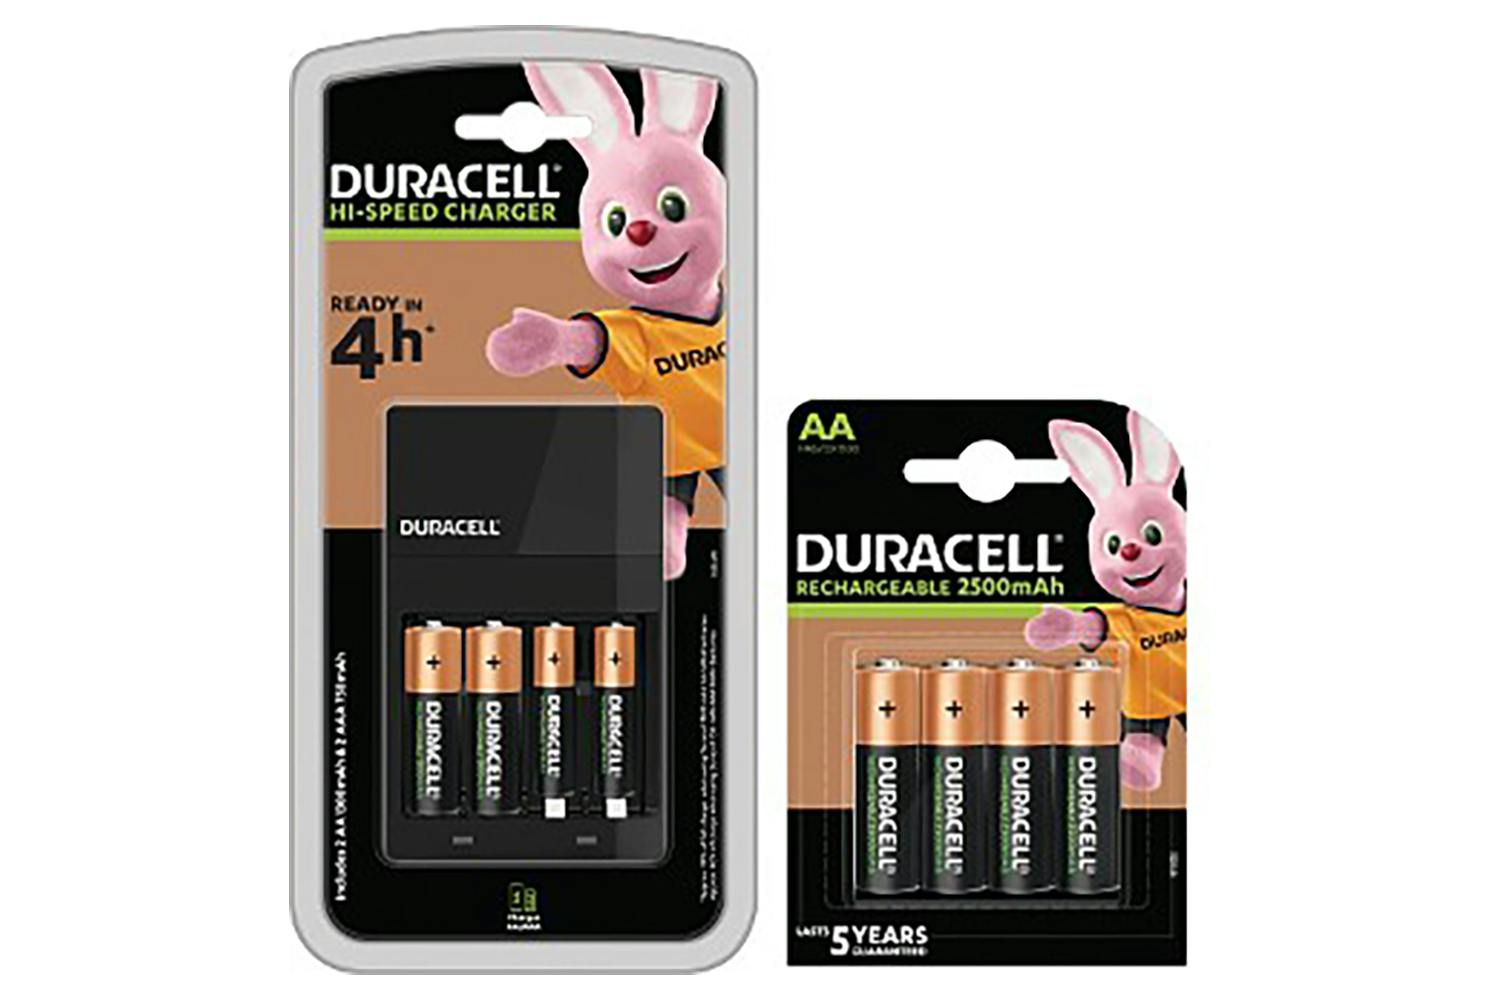 Duracell 4 Hour Charger + 6 AA, 2 x AAA Battery